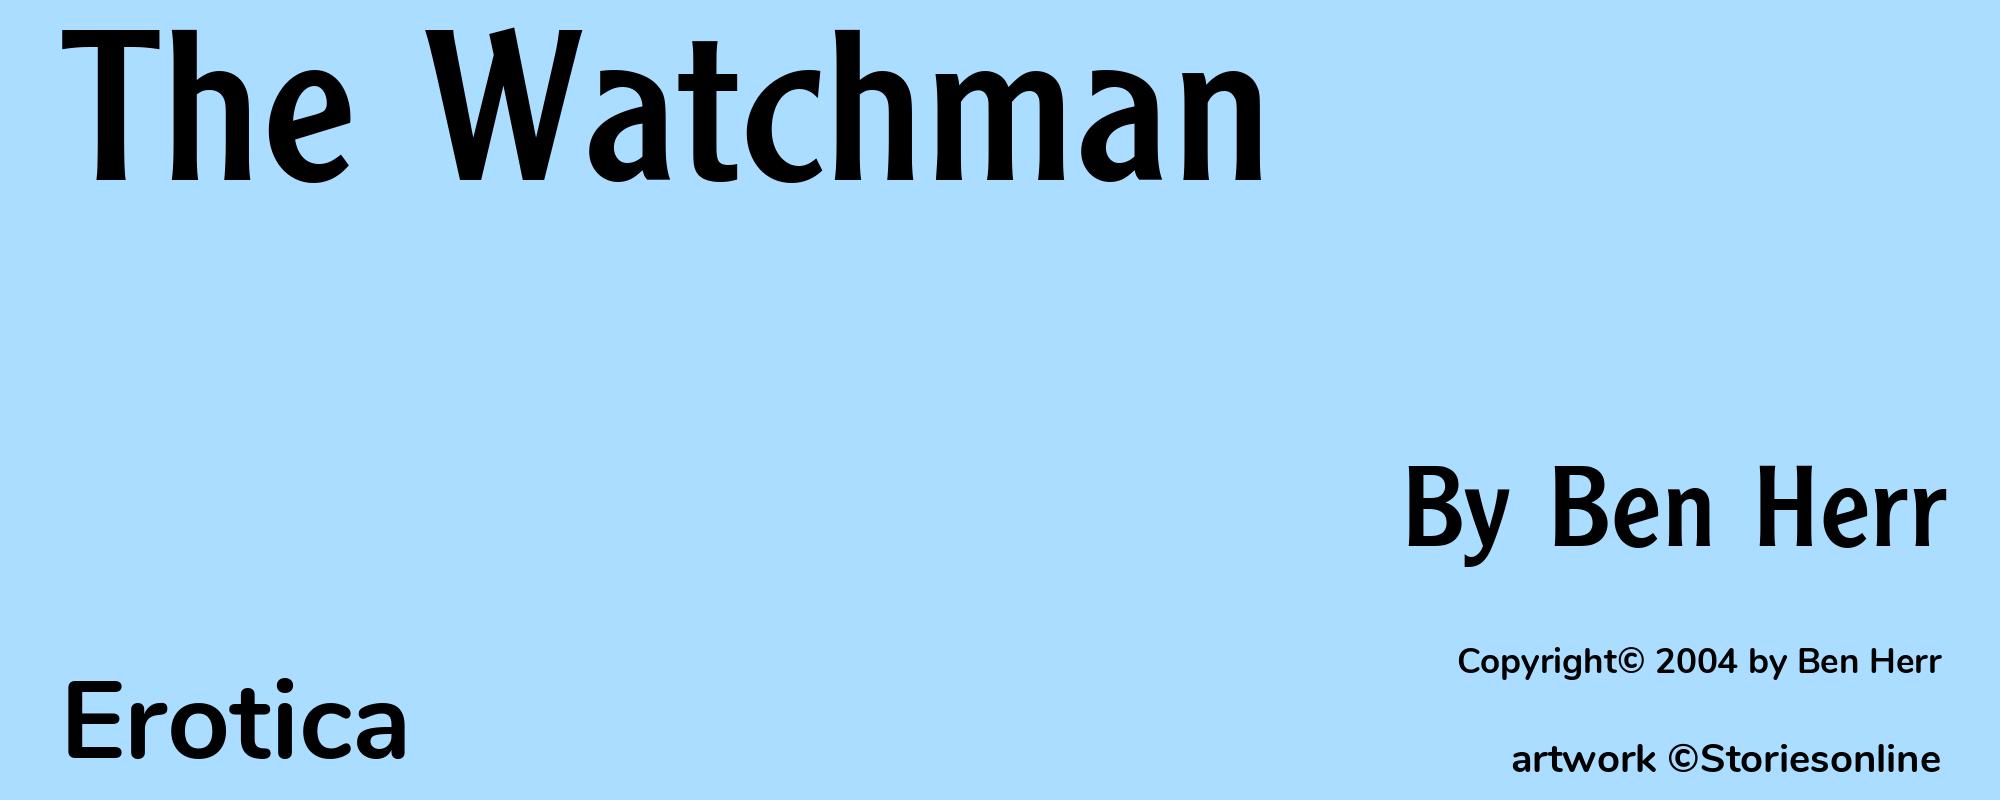 The Watchman - Cover